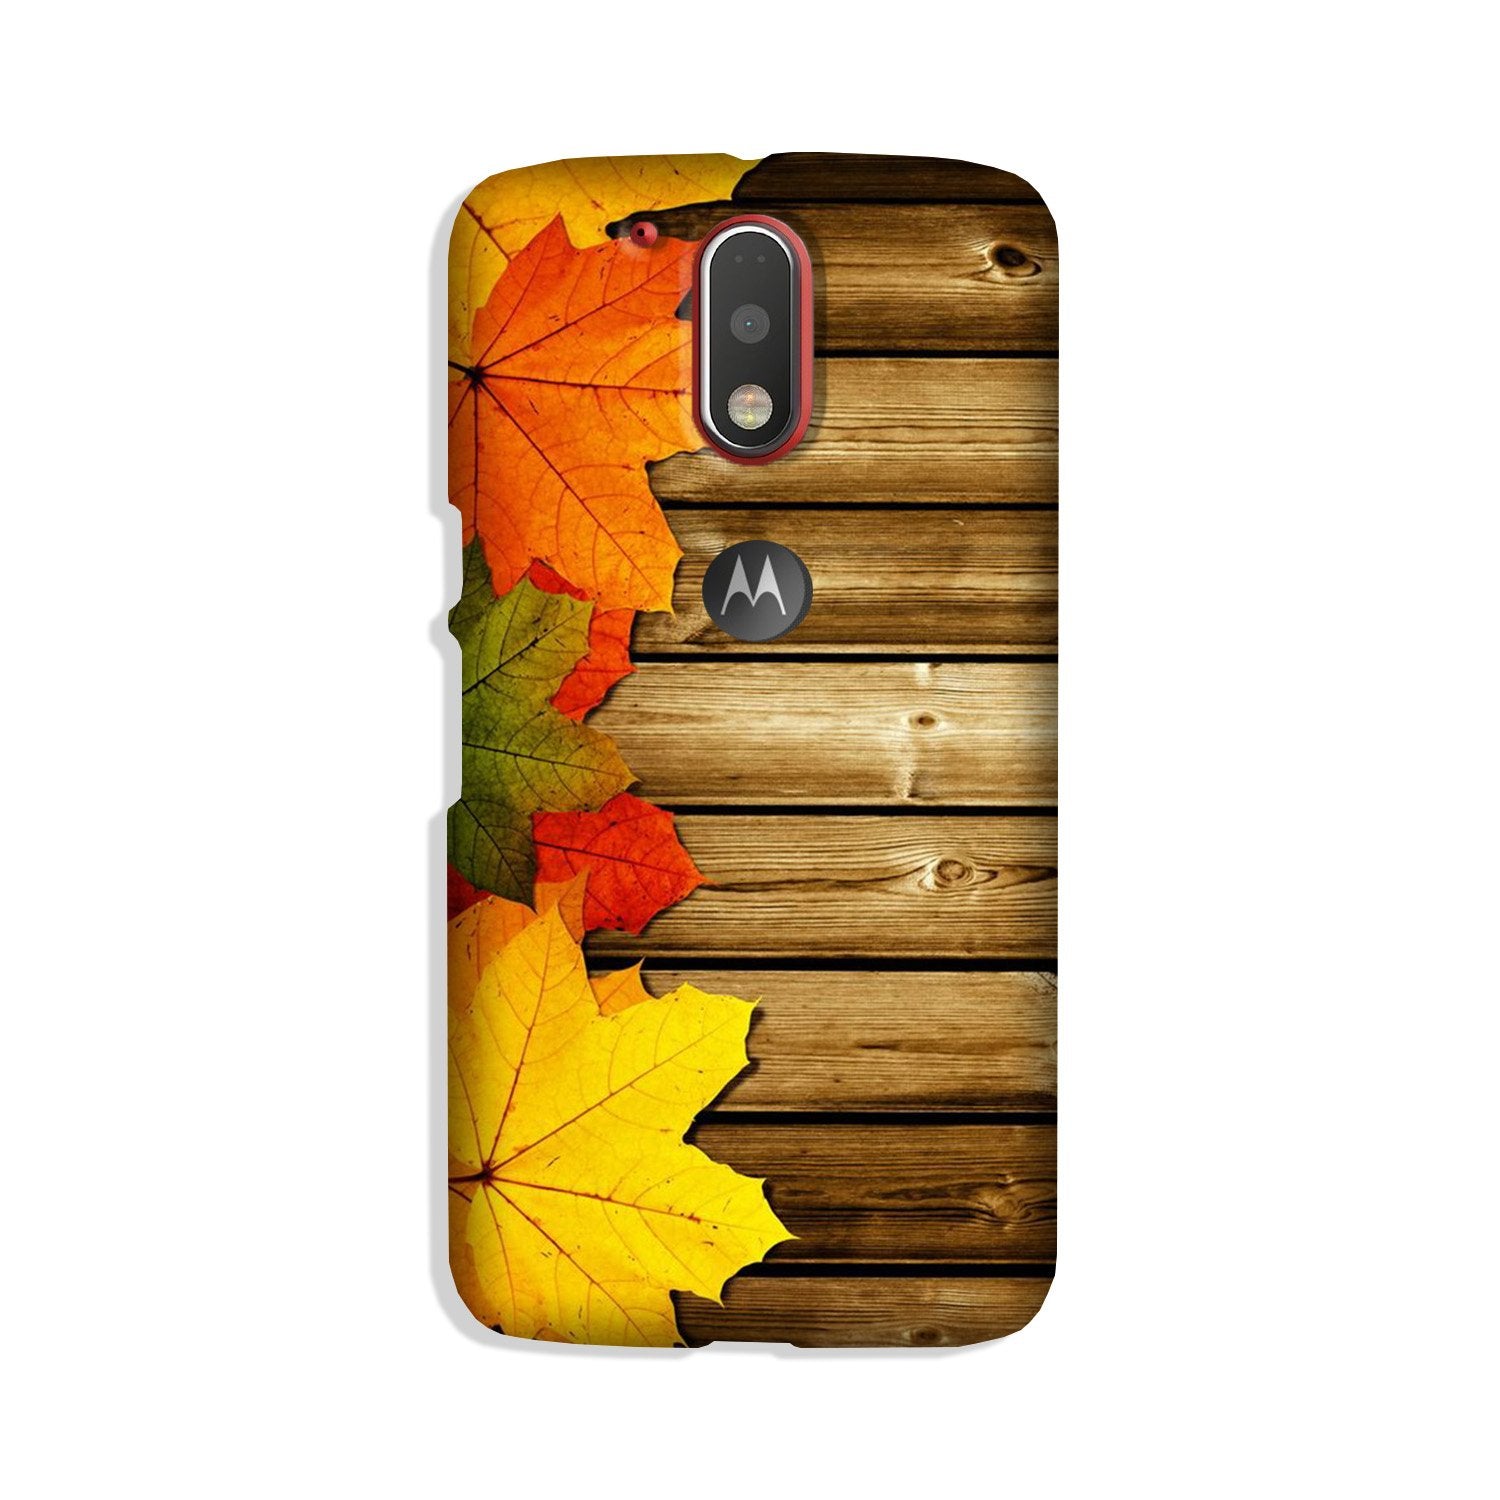 Wooden look Case for Moto G4 Plus